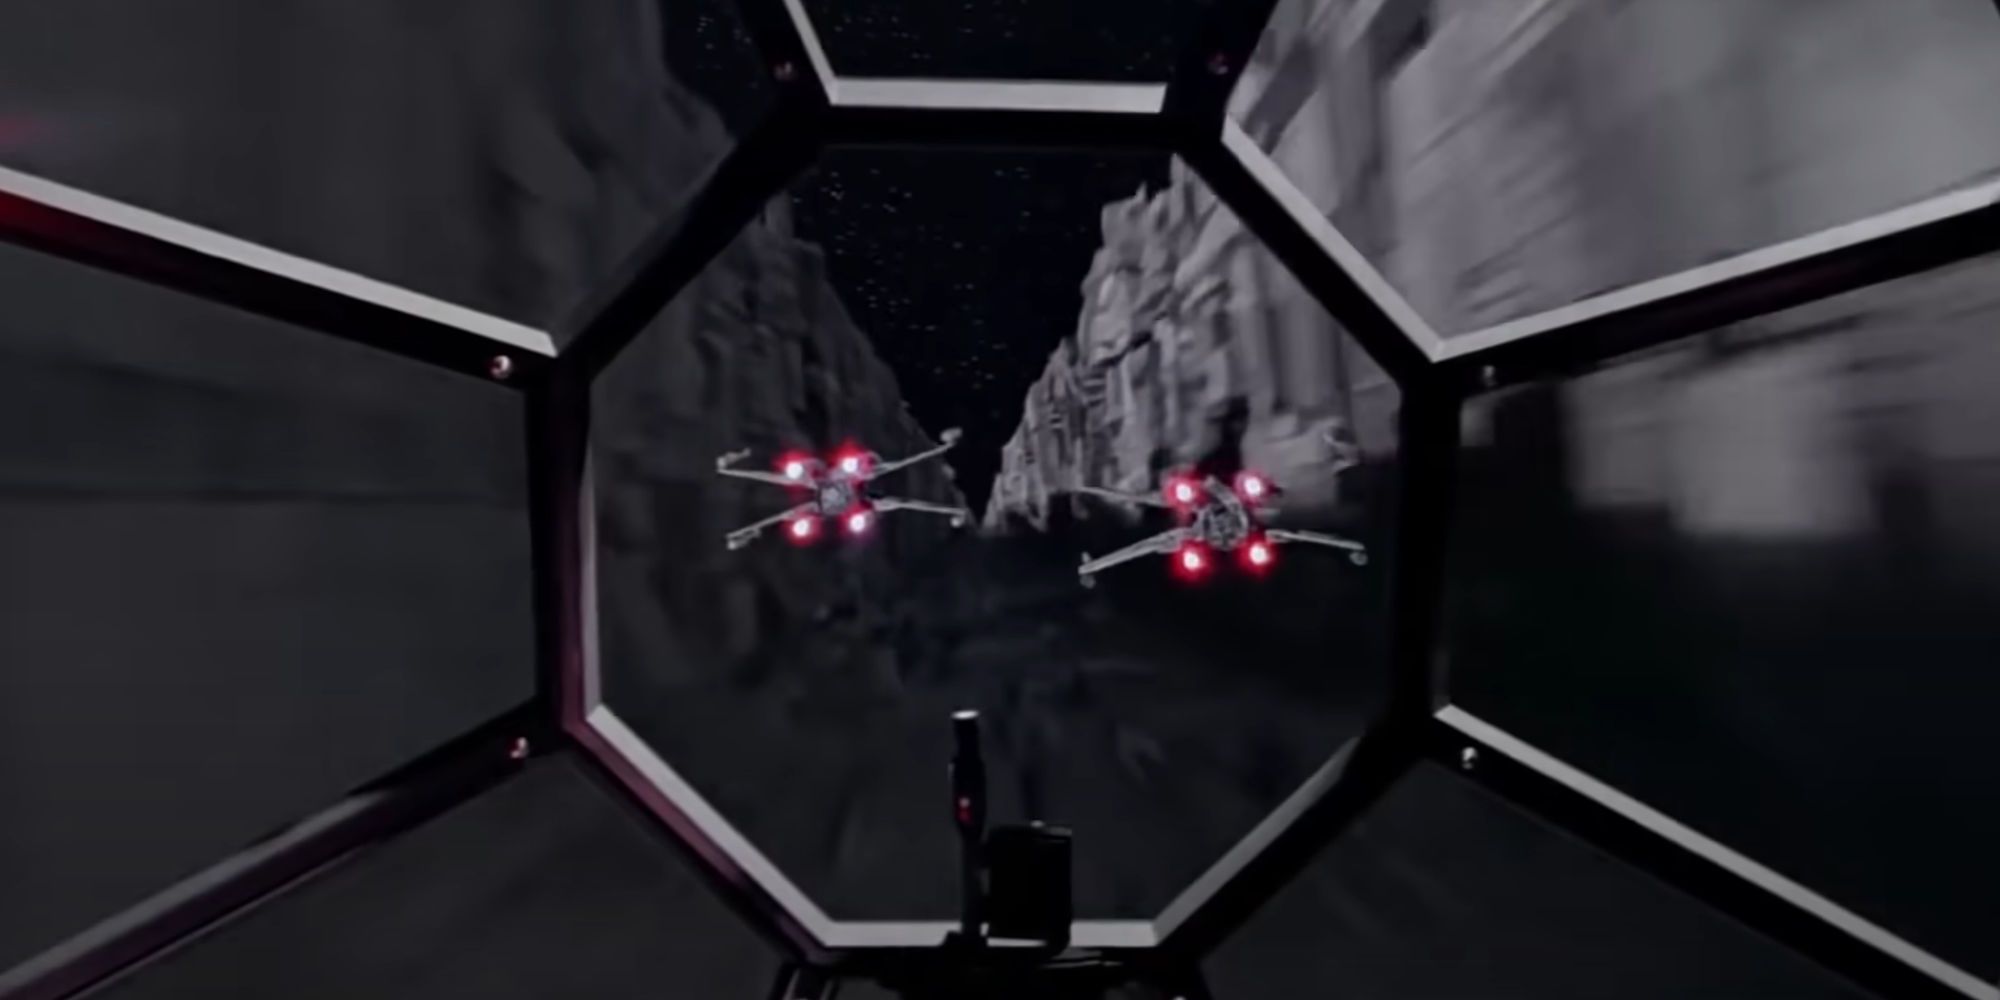 The view out of Darth Vader's TIE Fighter cockpit as he chases 2 X-wings down the Death Star trench